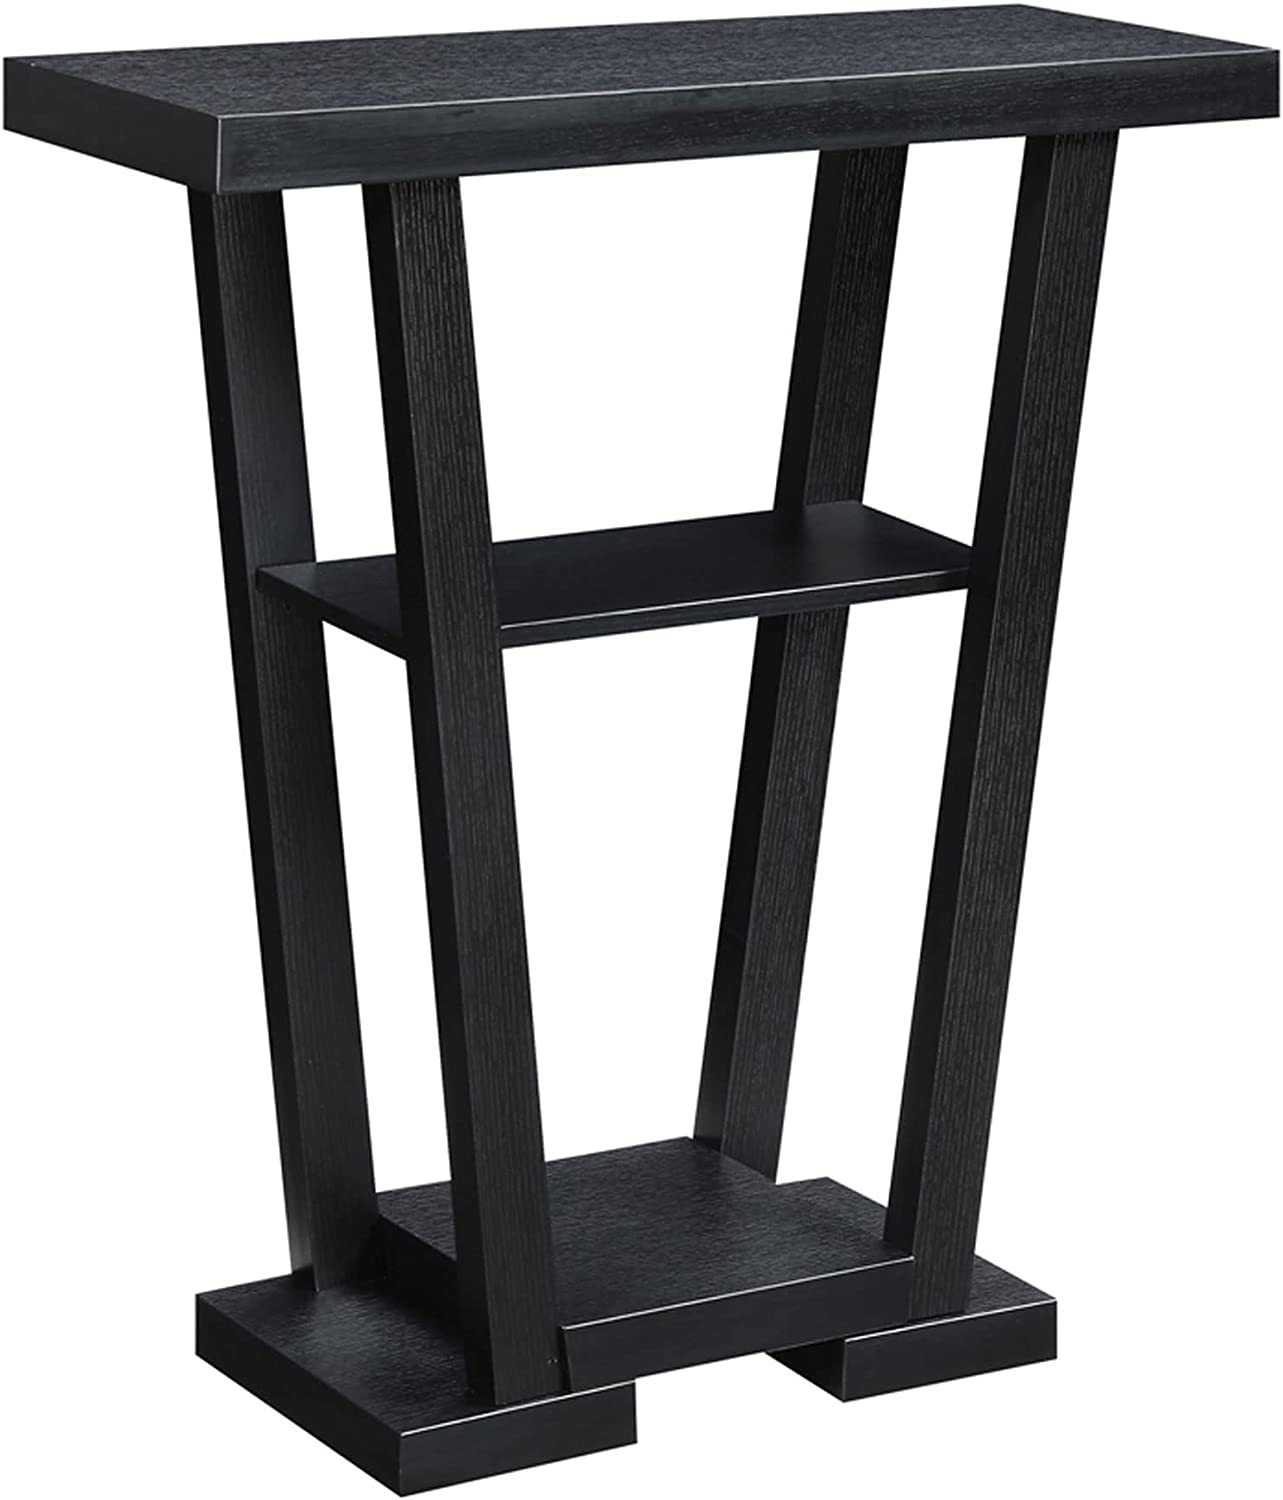 Newport V Console From Convenience Concepts In Black. - $112.93